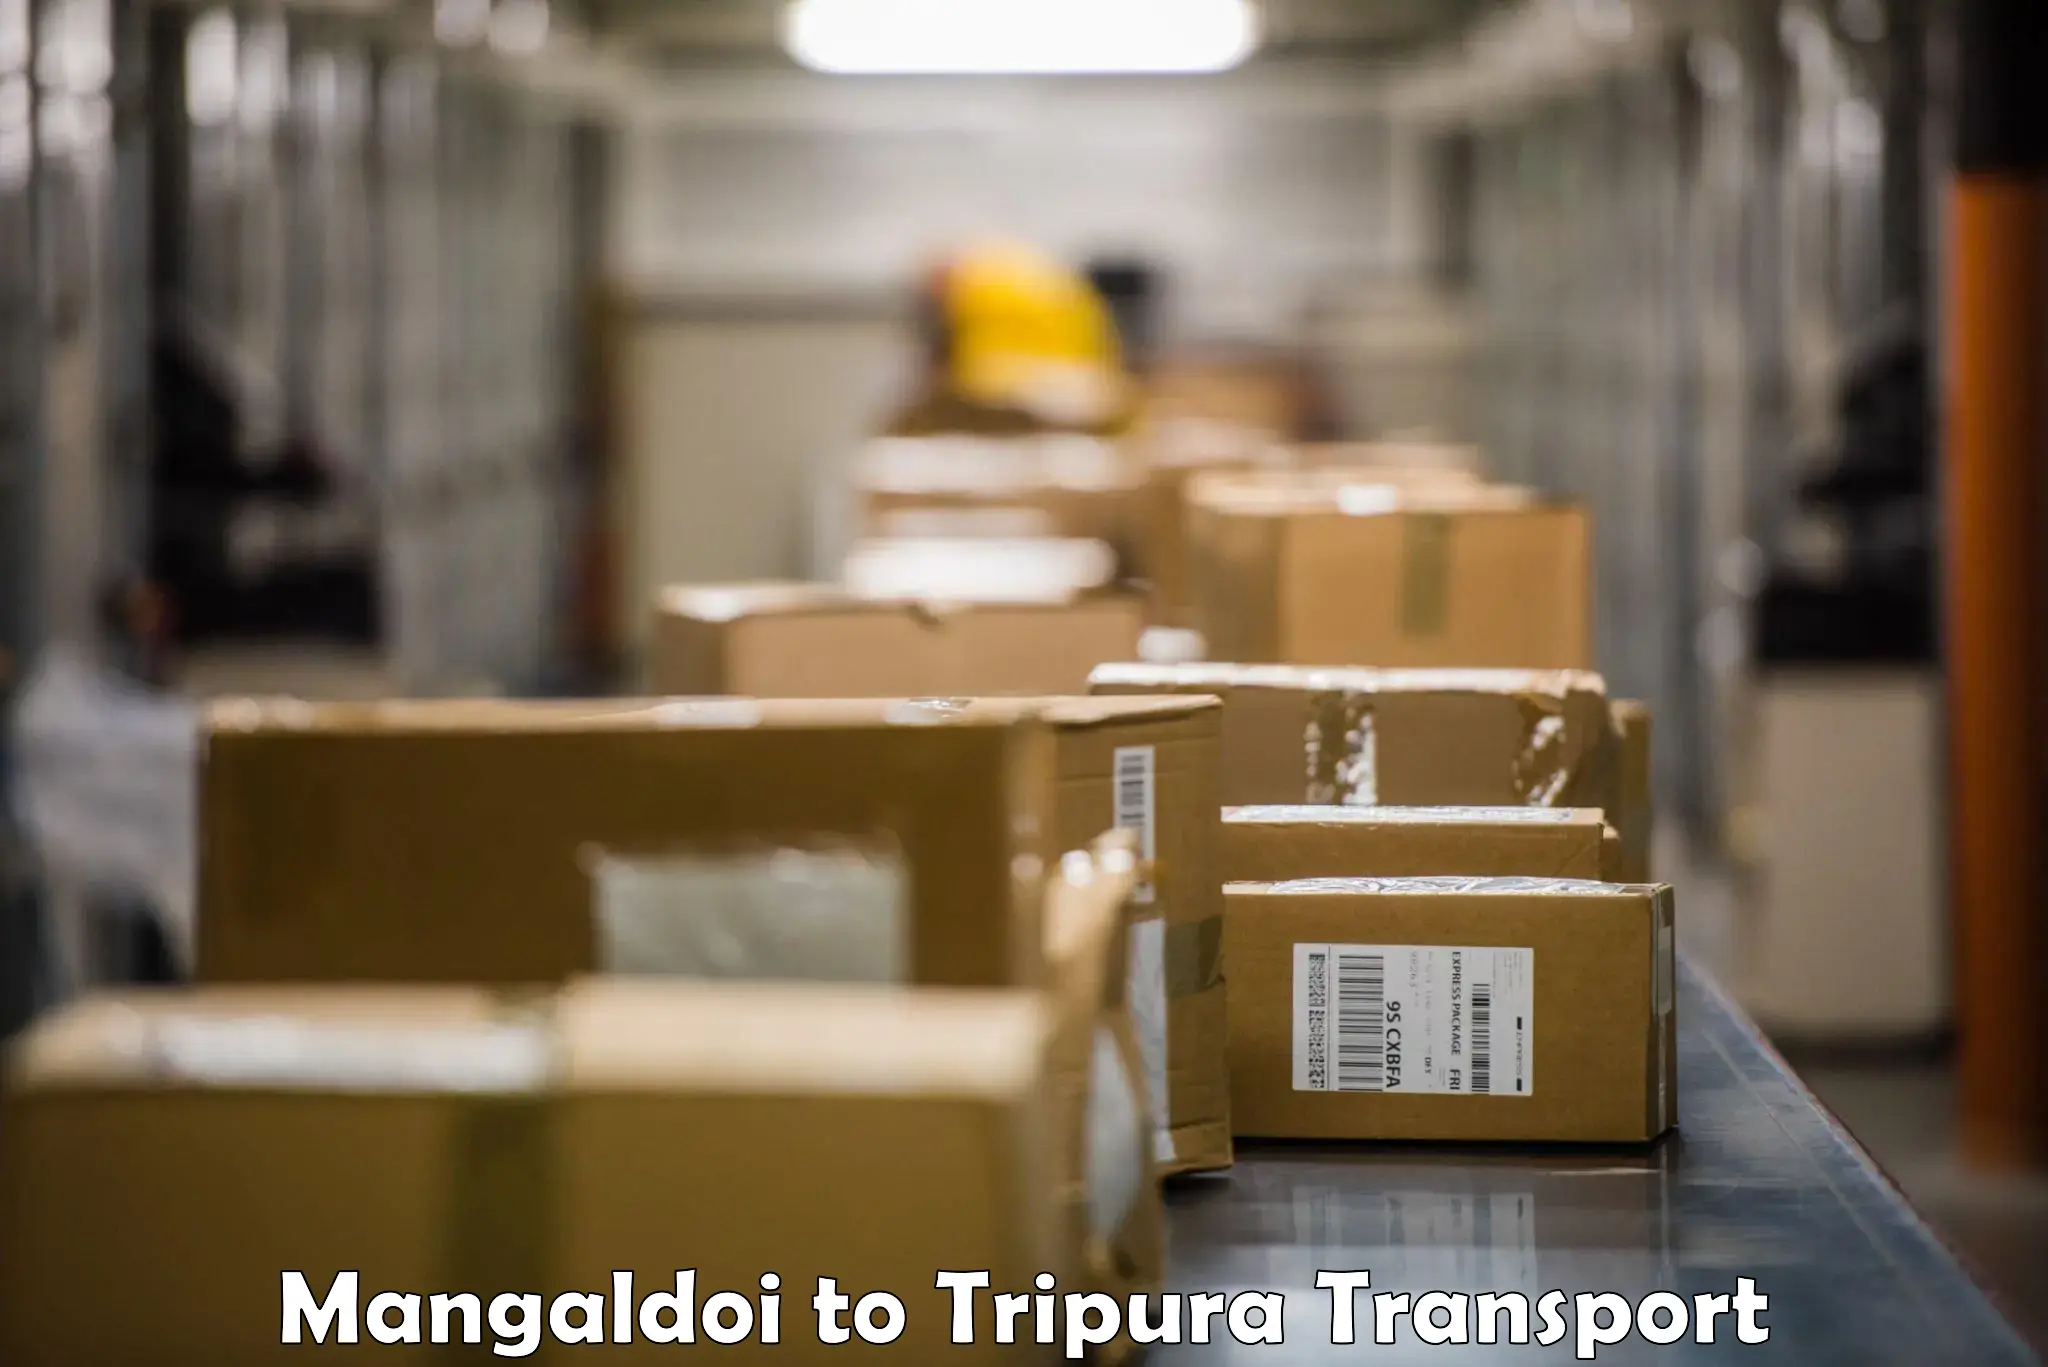 Transport bike from one state to another Mangaldoi to Udaipur Tripura